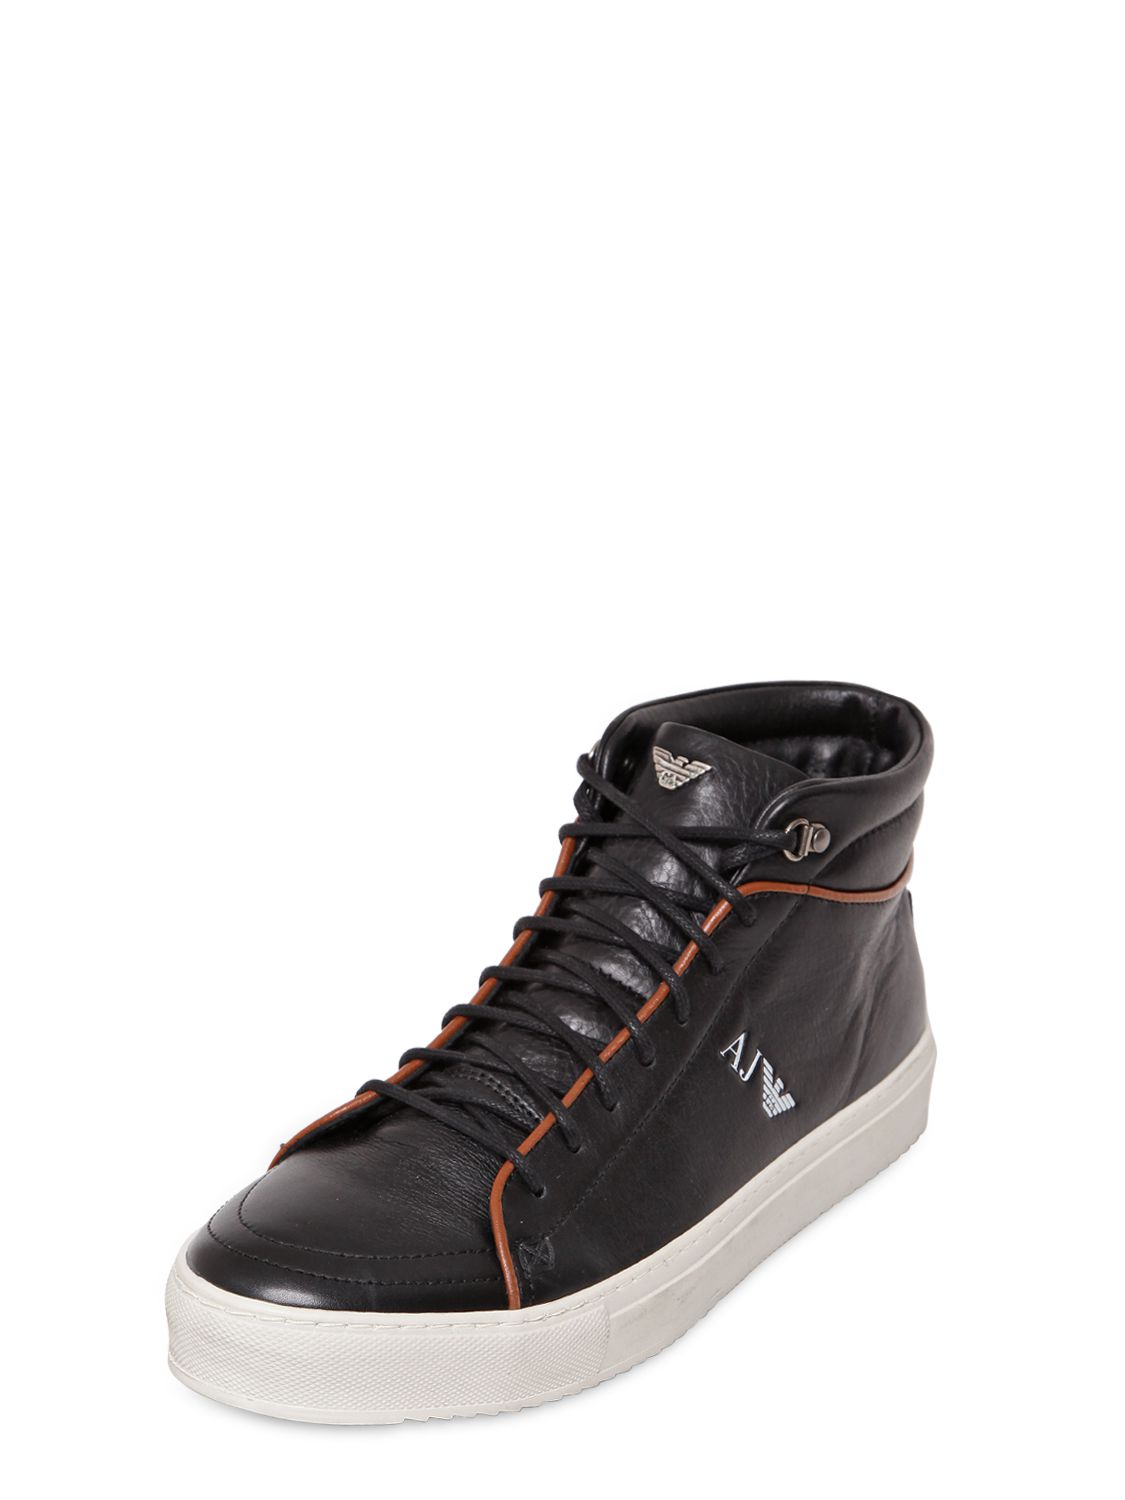 Lyst - Armani Jeans Nappa Leather High Top Sneakers in Black for Men